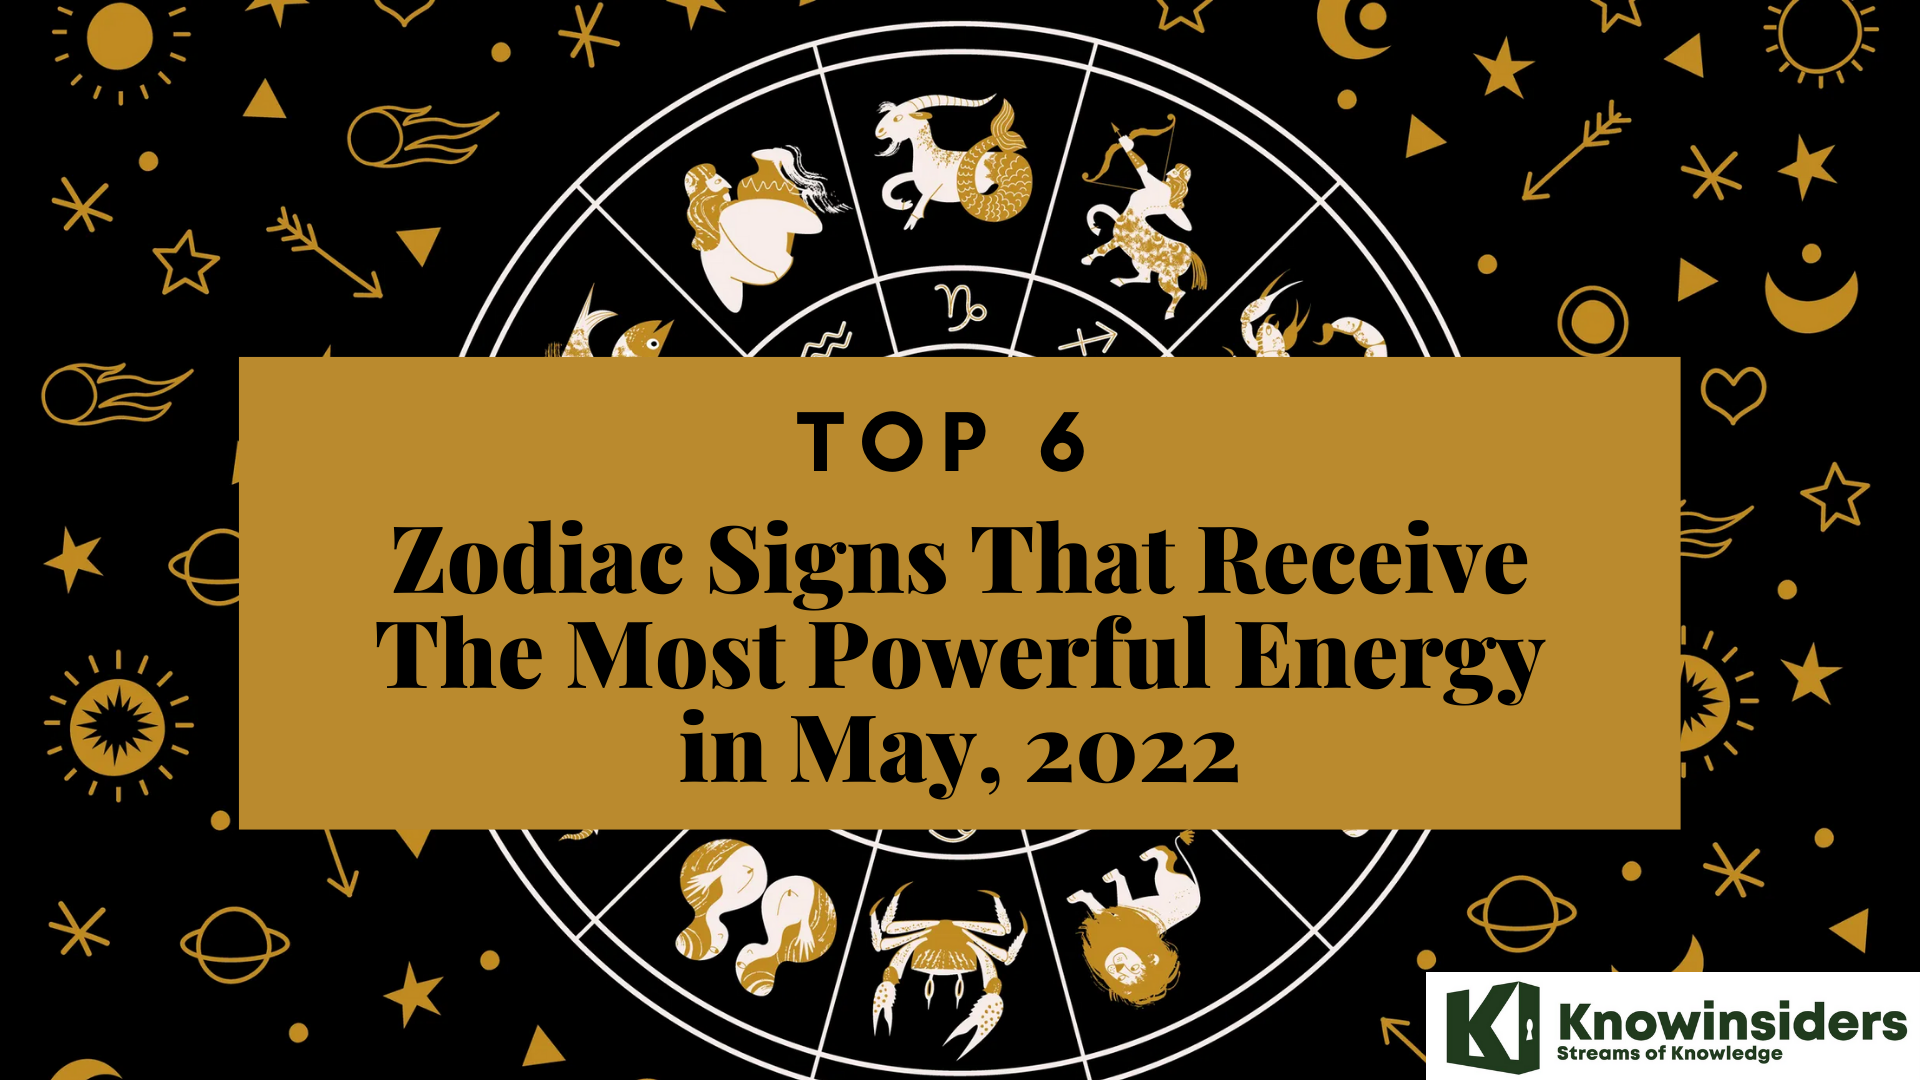 6 Zodiac Signs With The Most Powerful Energy in the Last Days of May, 2022